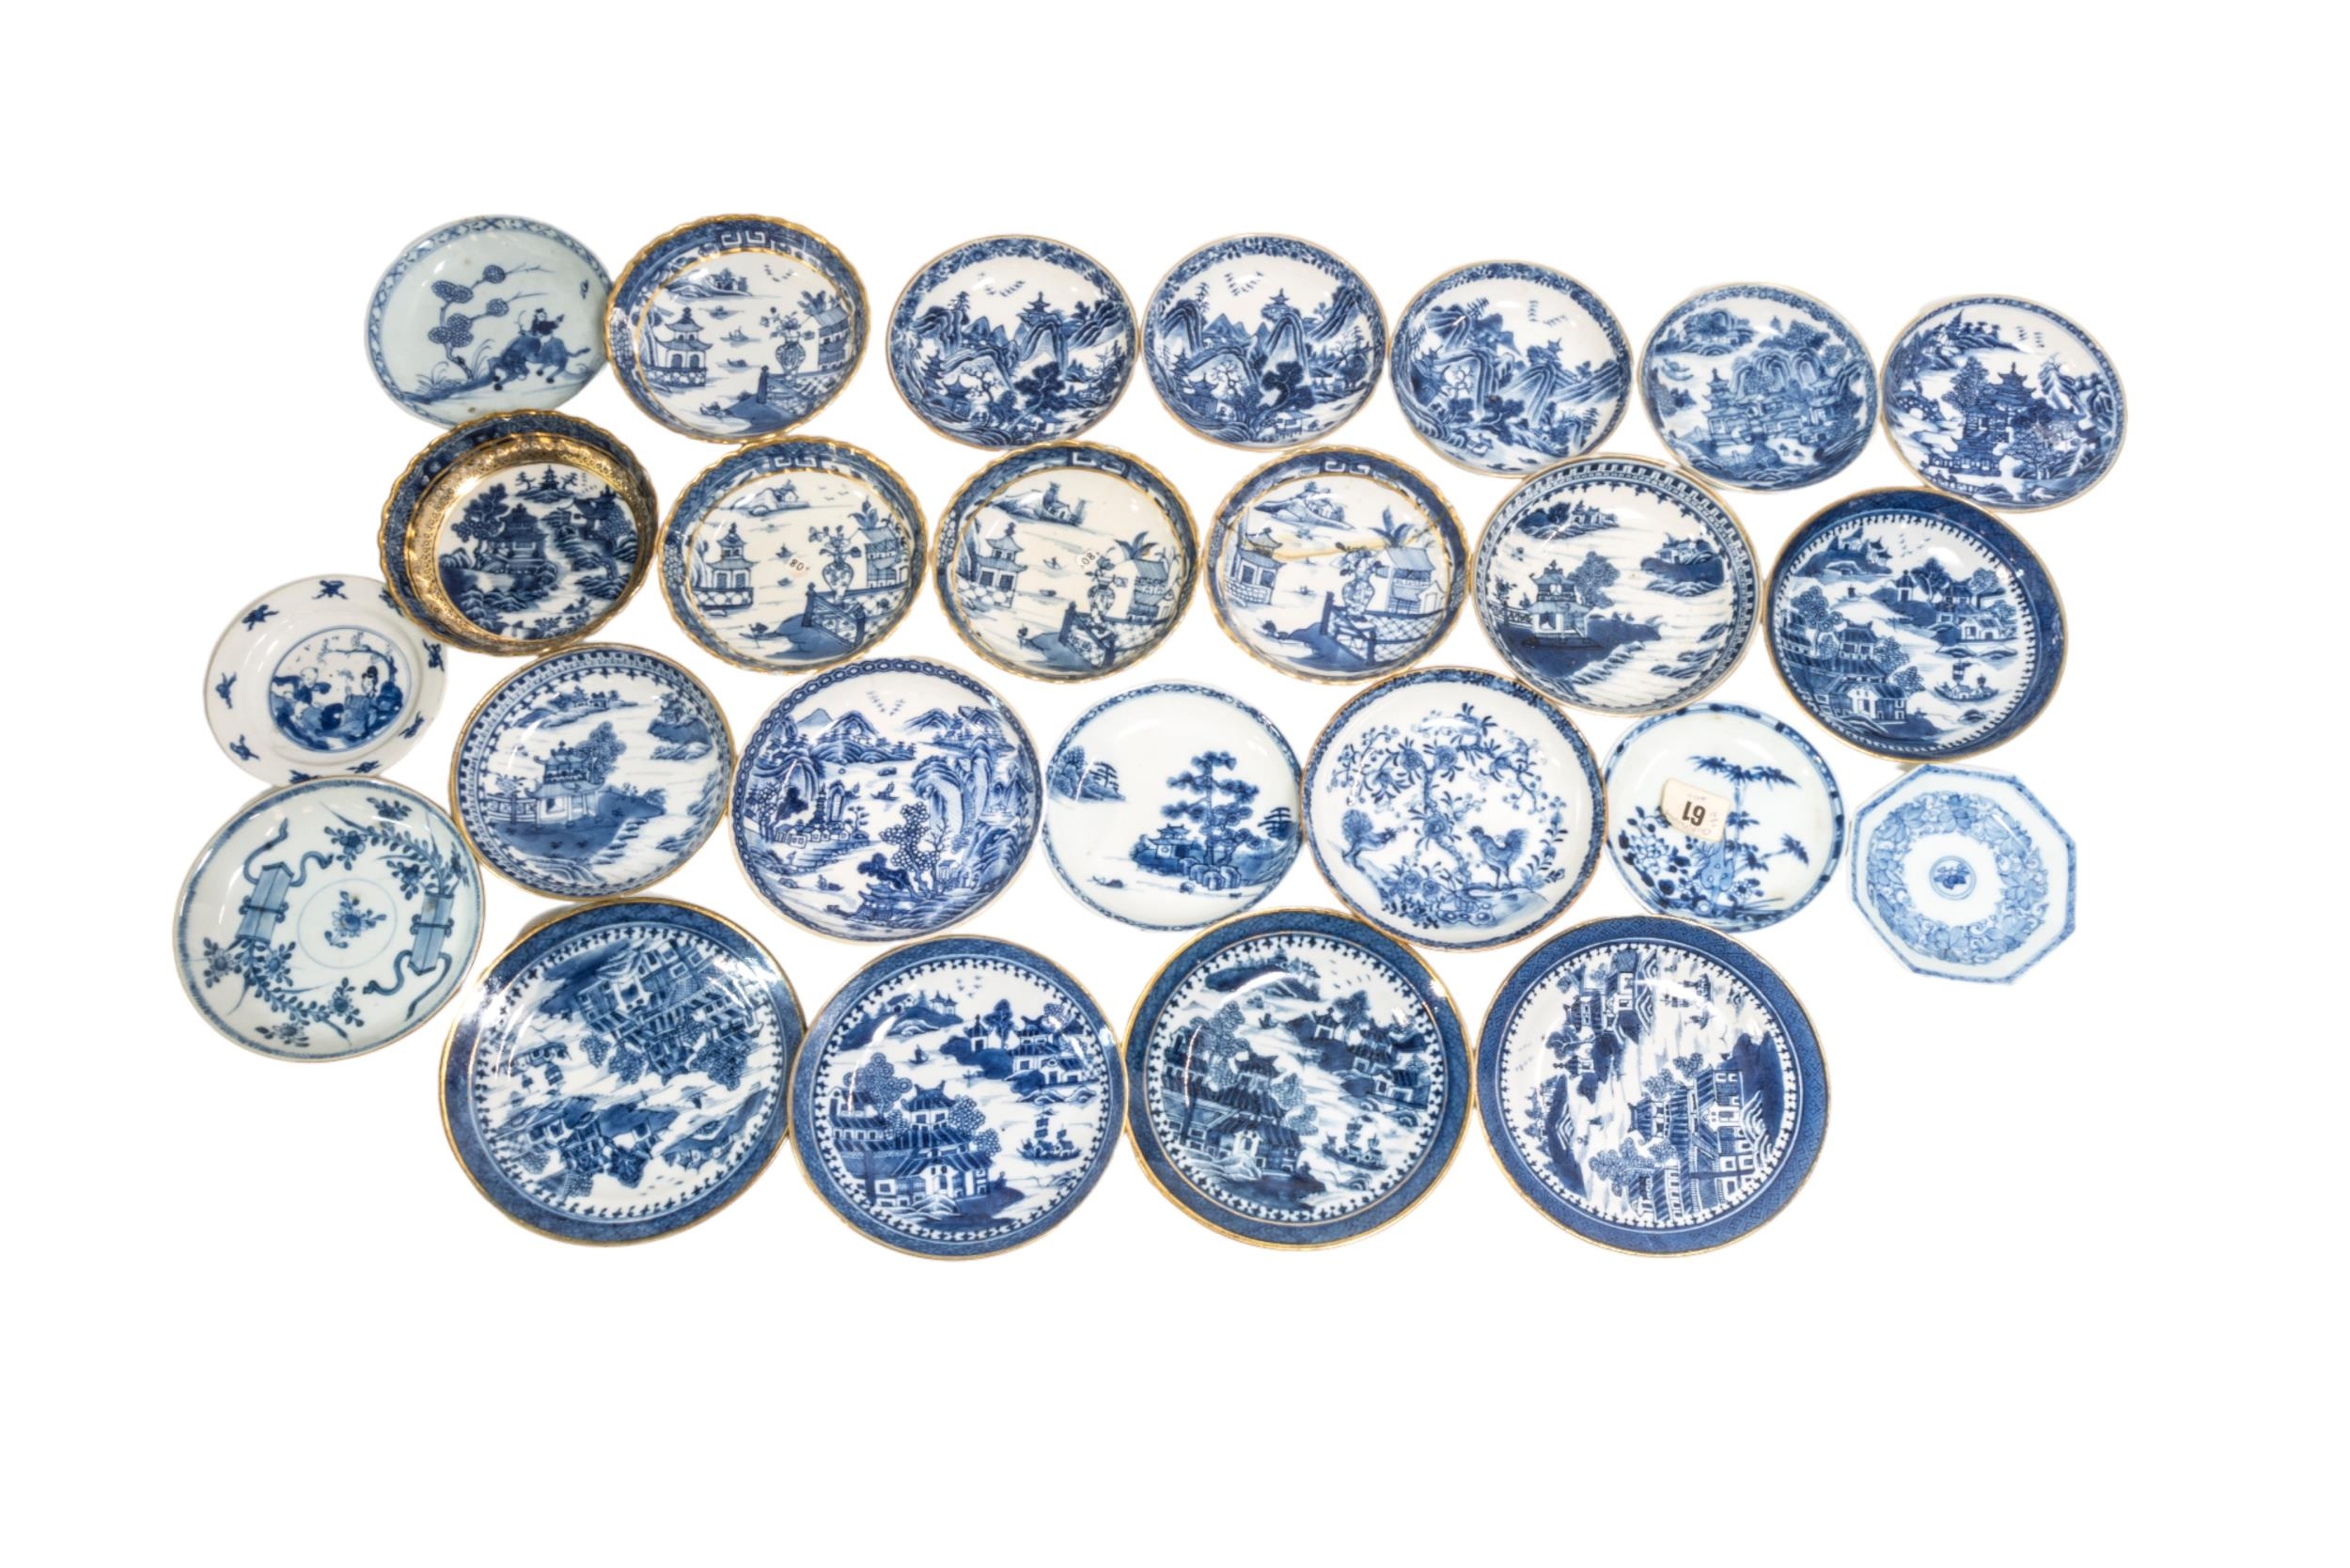 A LARGE COLLECTION OF CHINESE EXPORT PORCELAIN TEABOWLS, SAUCERS AND CUPS QING DYNASTY, MOSTLY - Image 2 of 6